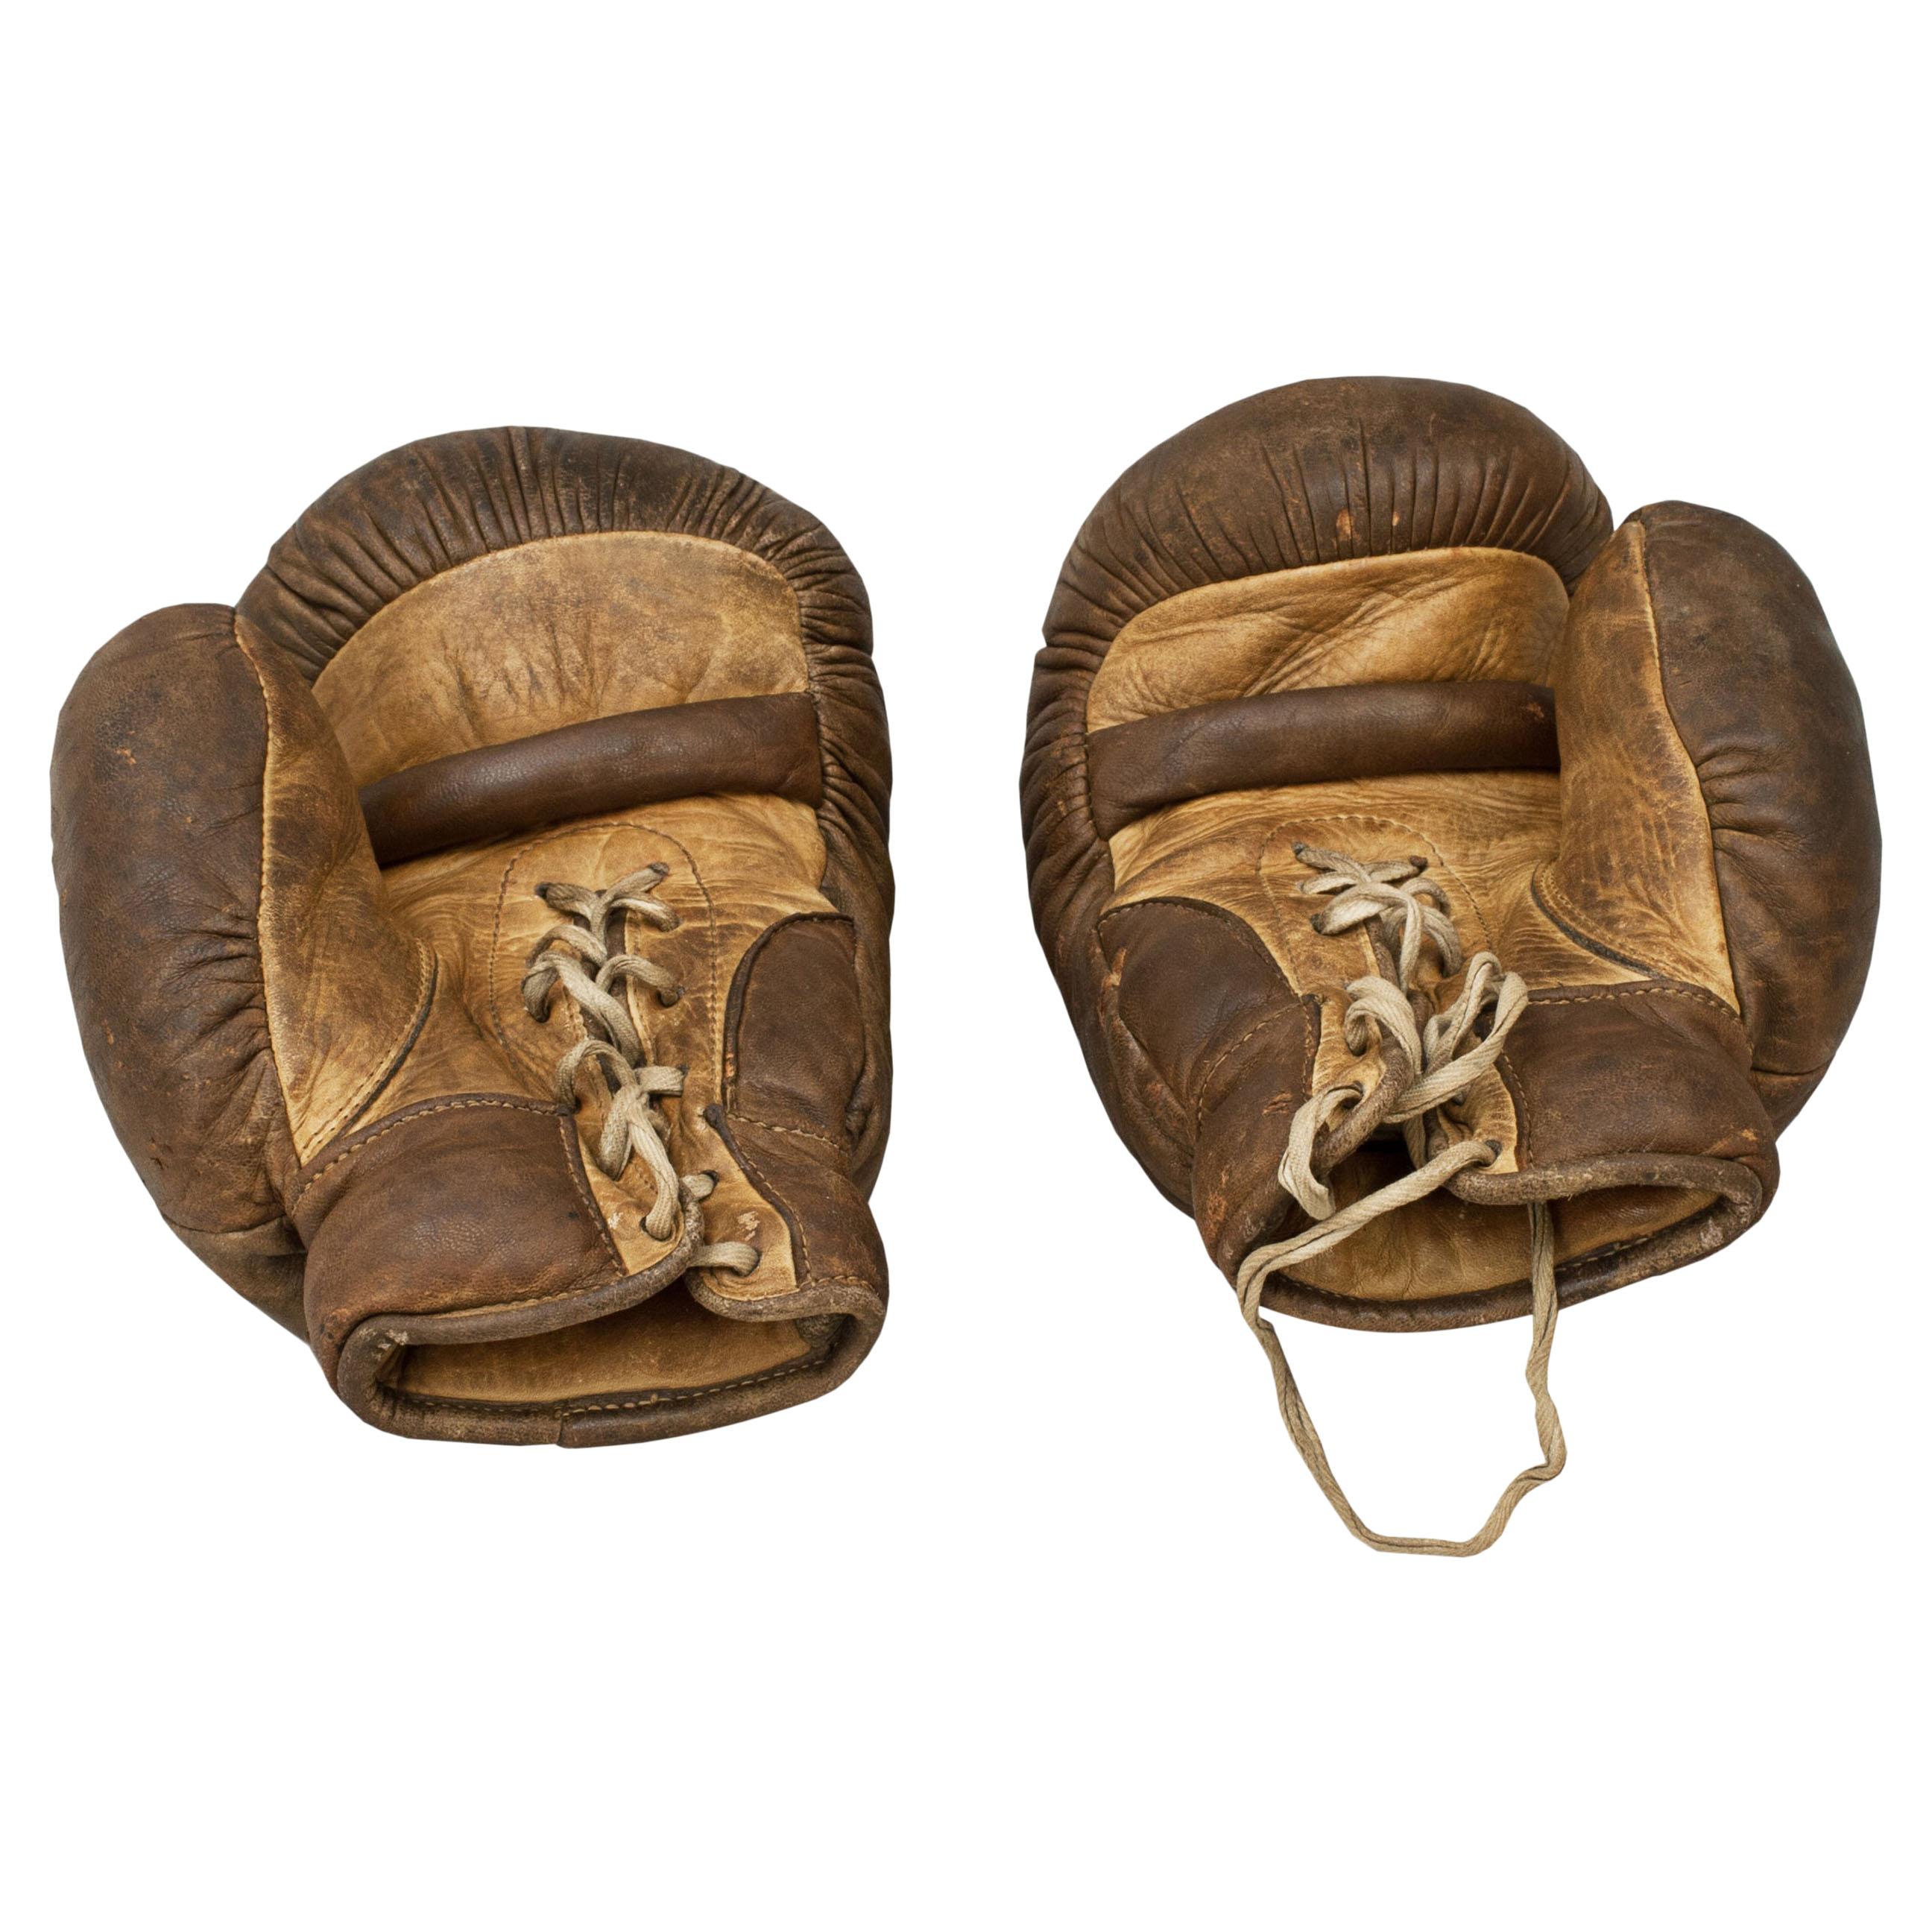 Pair of Vintage Boxing Gloves in Leather